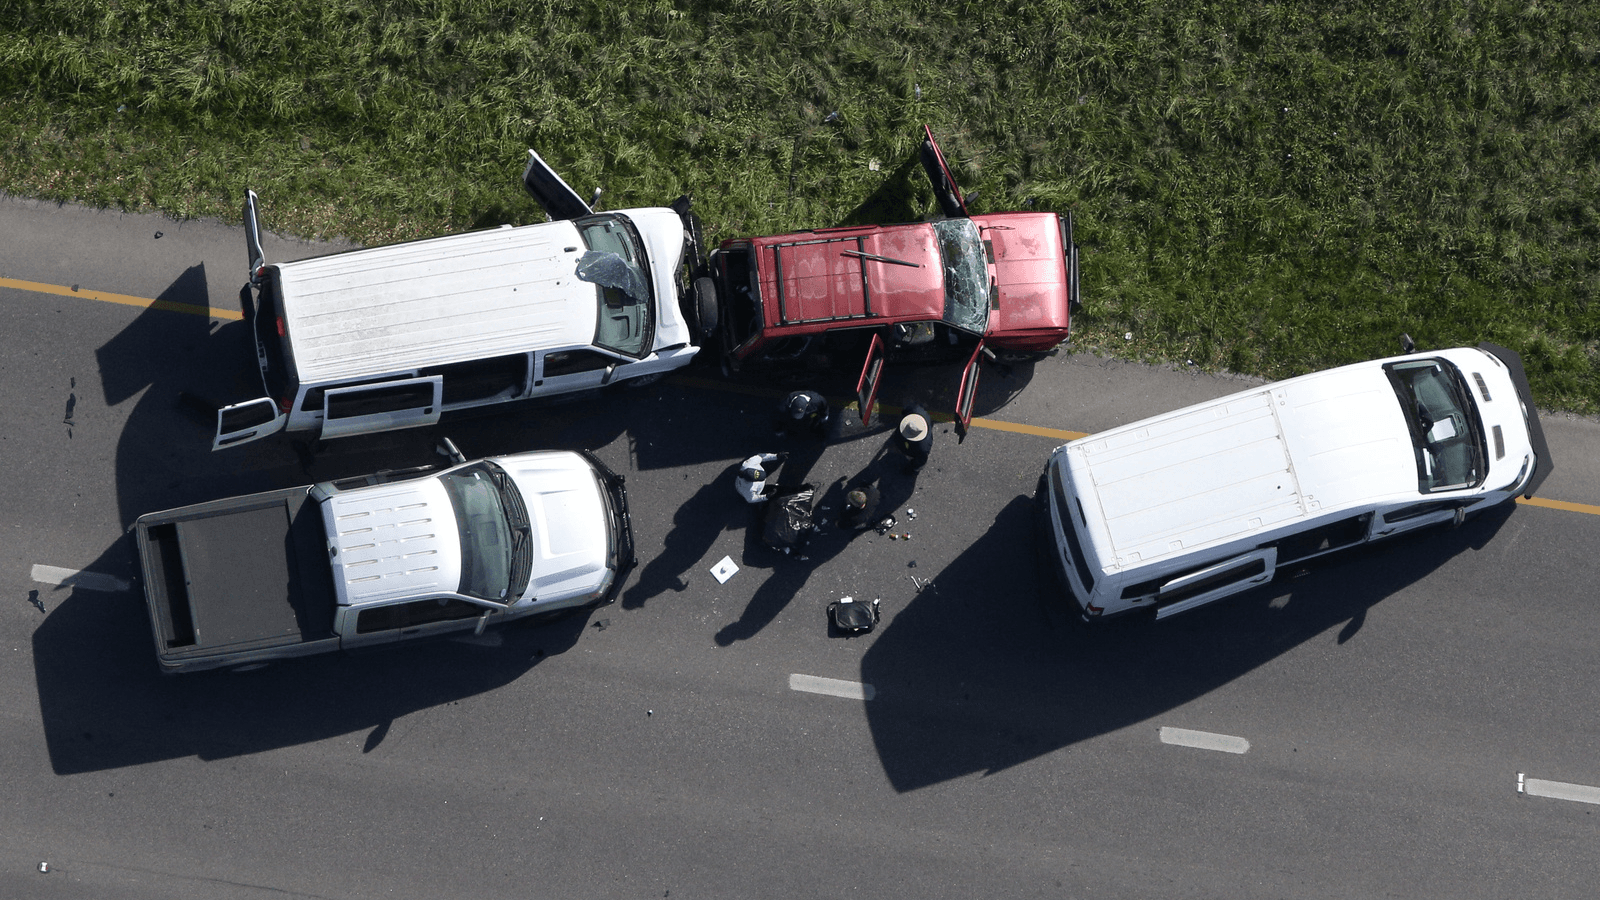 Law enforcement personnel investigate the scene where the Texas bombing suspect blew himself up on the side of a highway north of Austin in Round Rock, Texas, March 21, 2018.